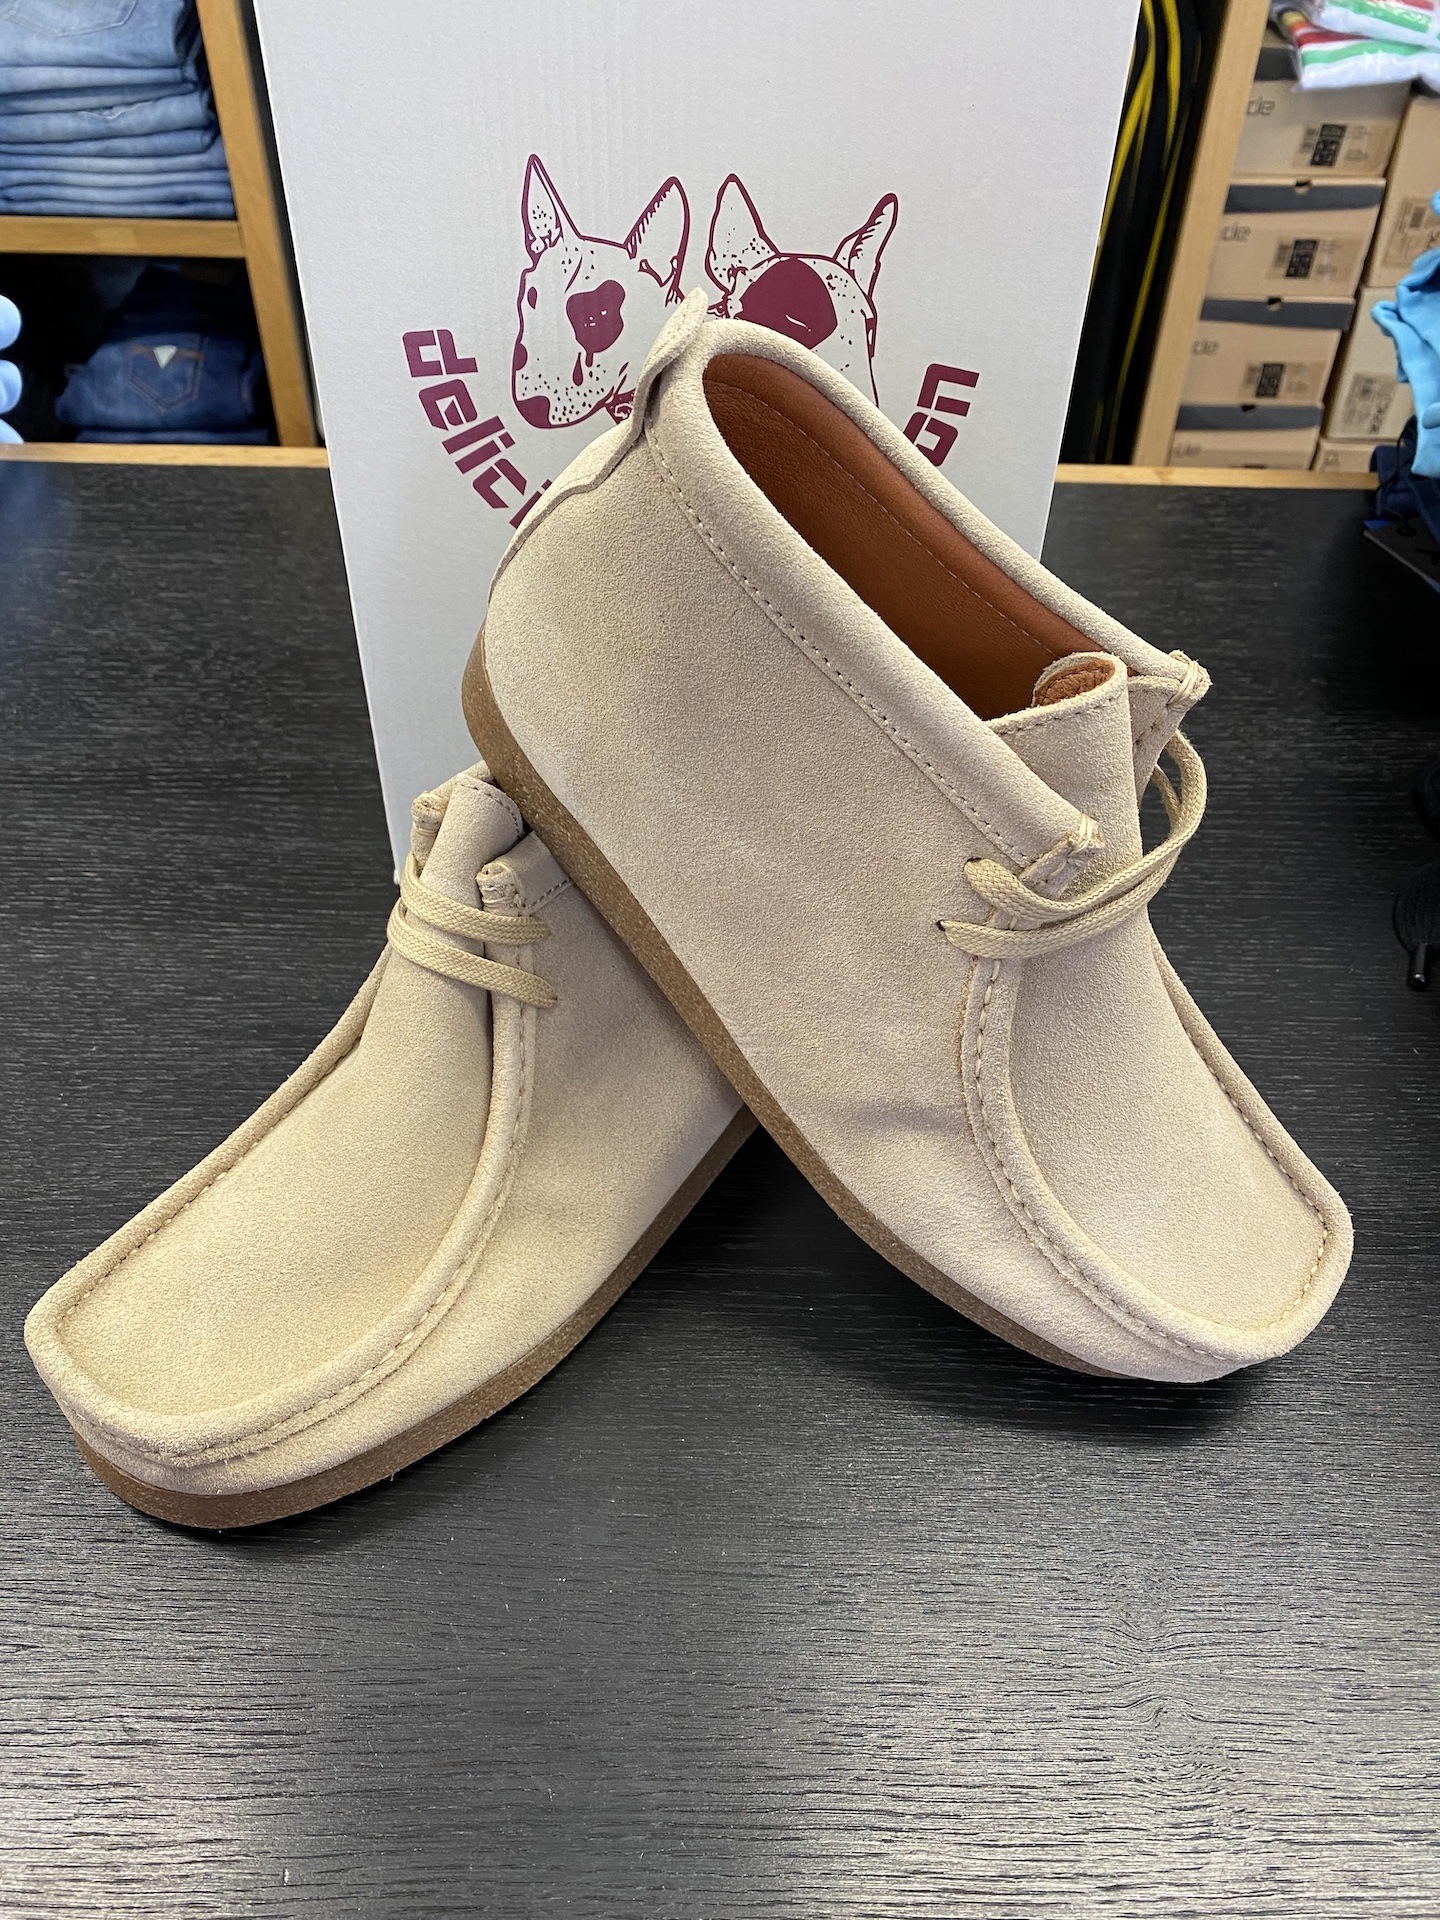 Delicious Junction - Wallabees - Ice (9456) - The 515